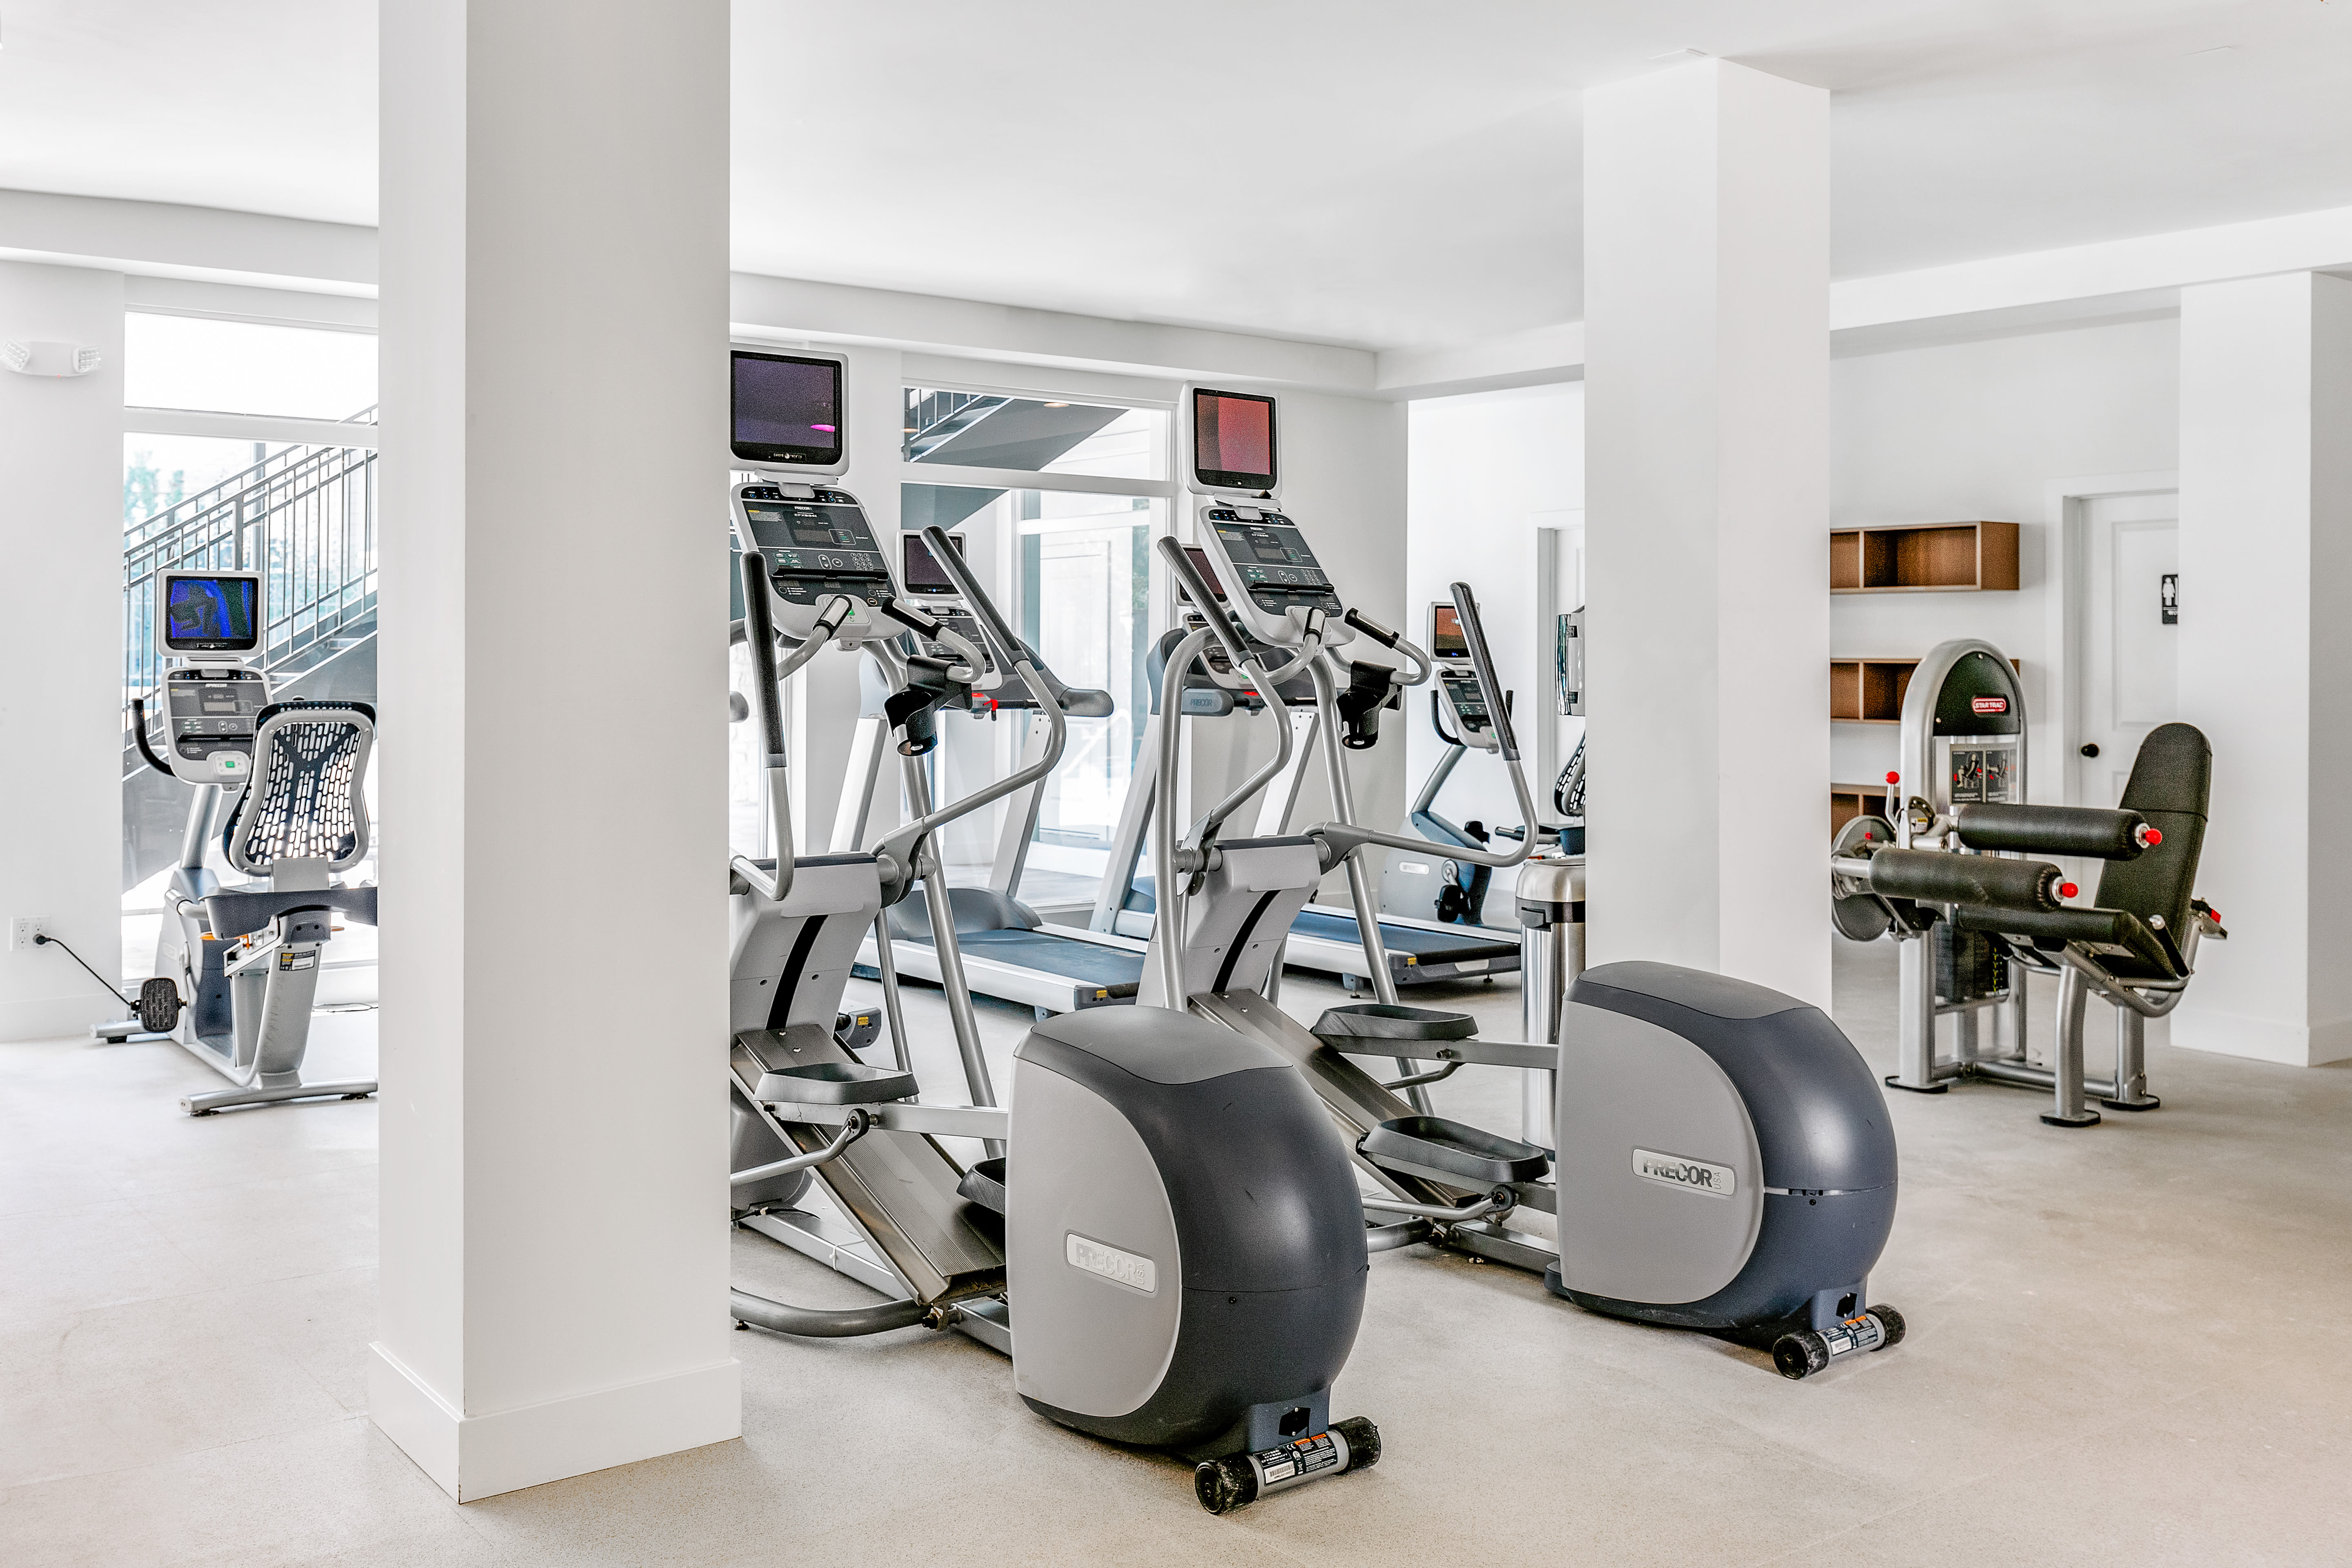 Well-equipped fitness center at Isabella Apartment Homes in Greenwood Village, Colorado